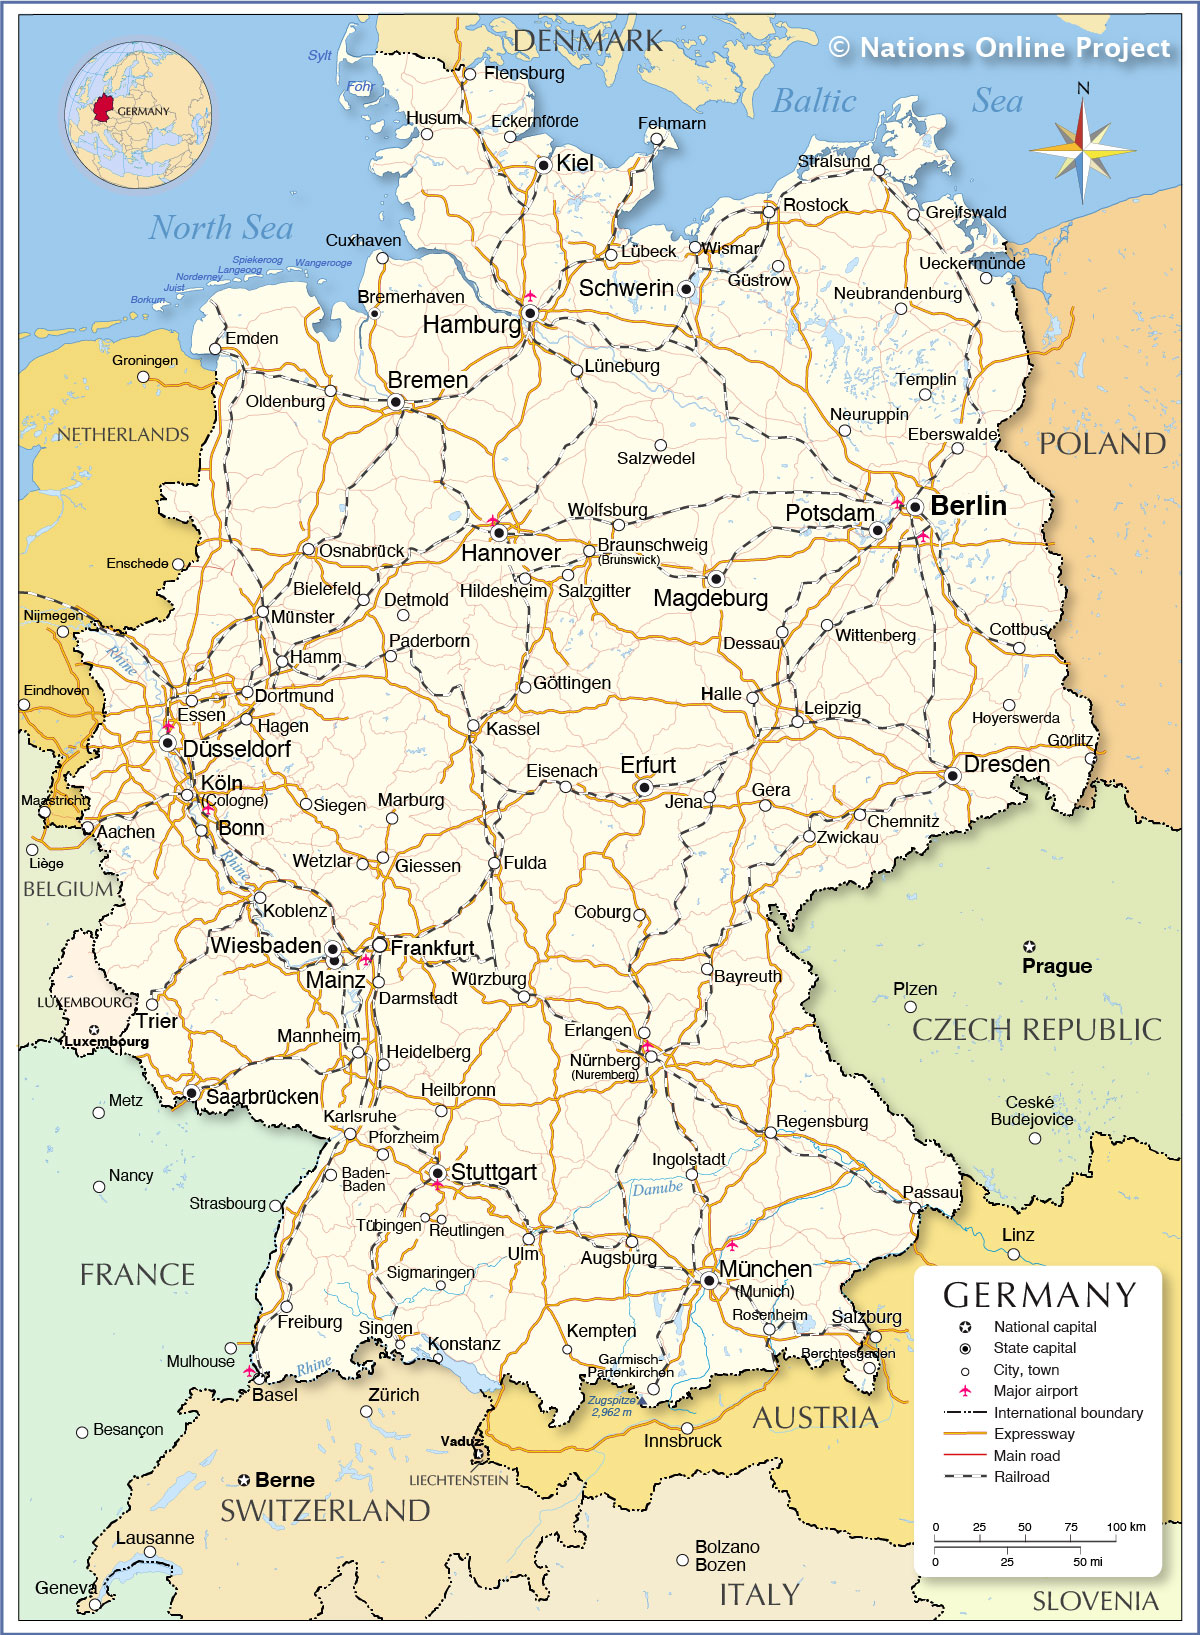 show me a map of germany please Political Map Of Germany Nations Online Project show me a map of germany please